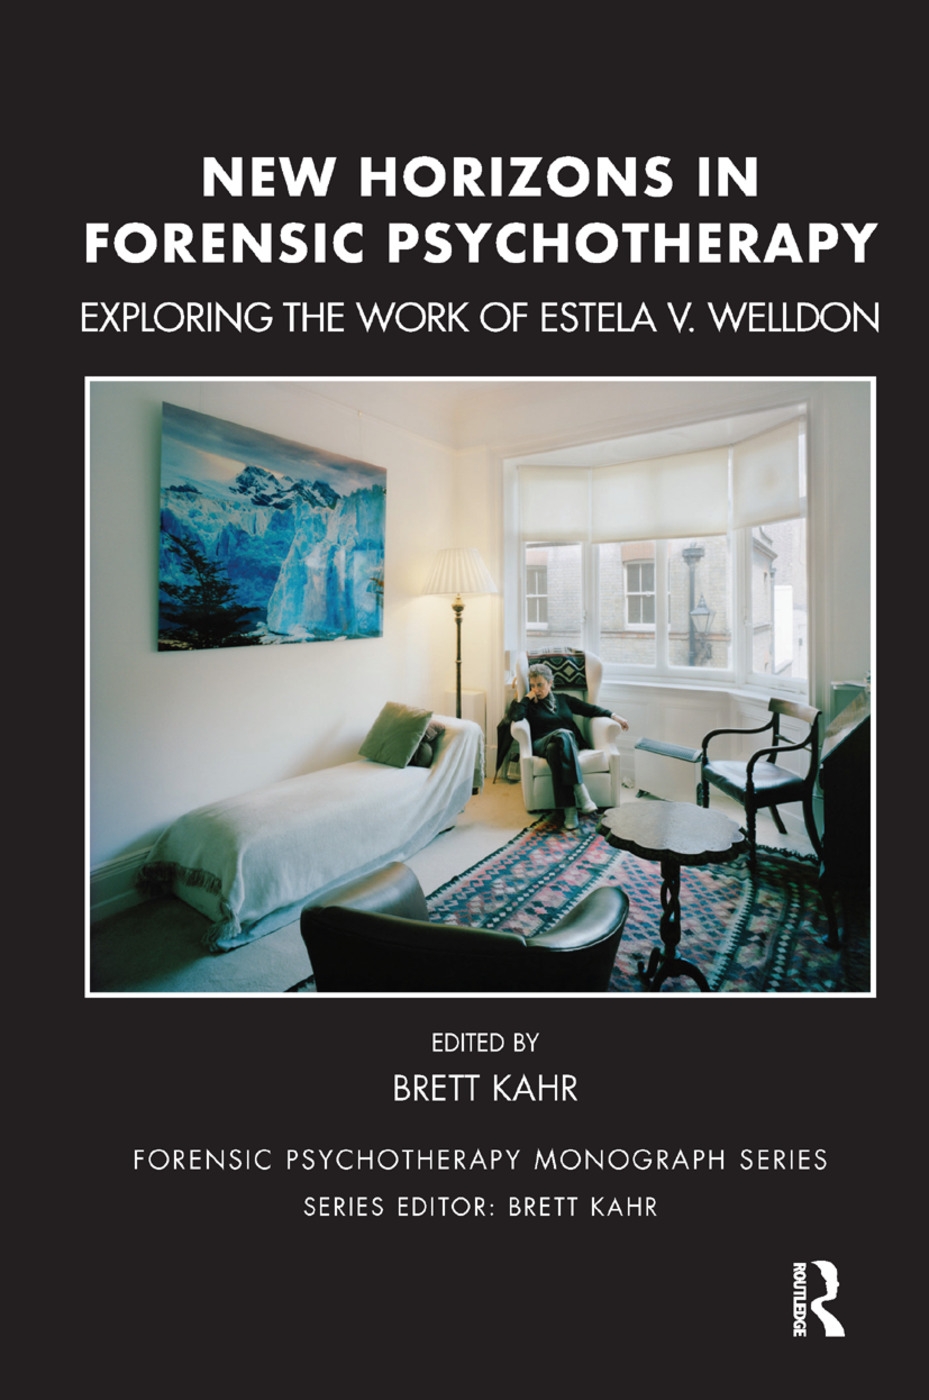 New Horizons in Forensic Psychotherapy: Exploring the Work of Estela V. Welldon